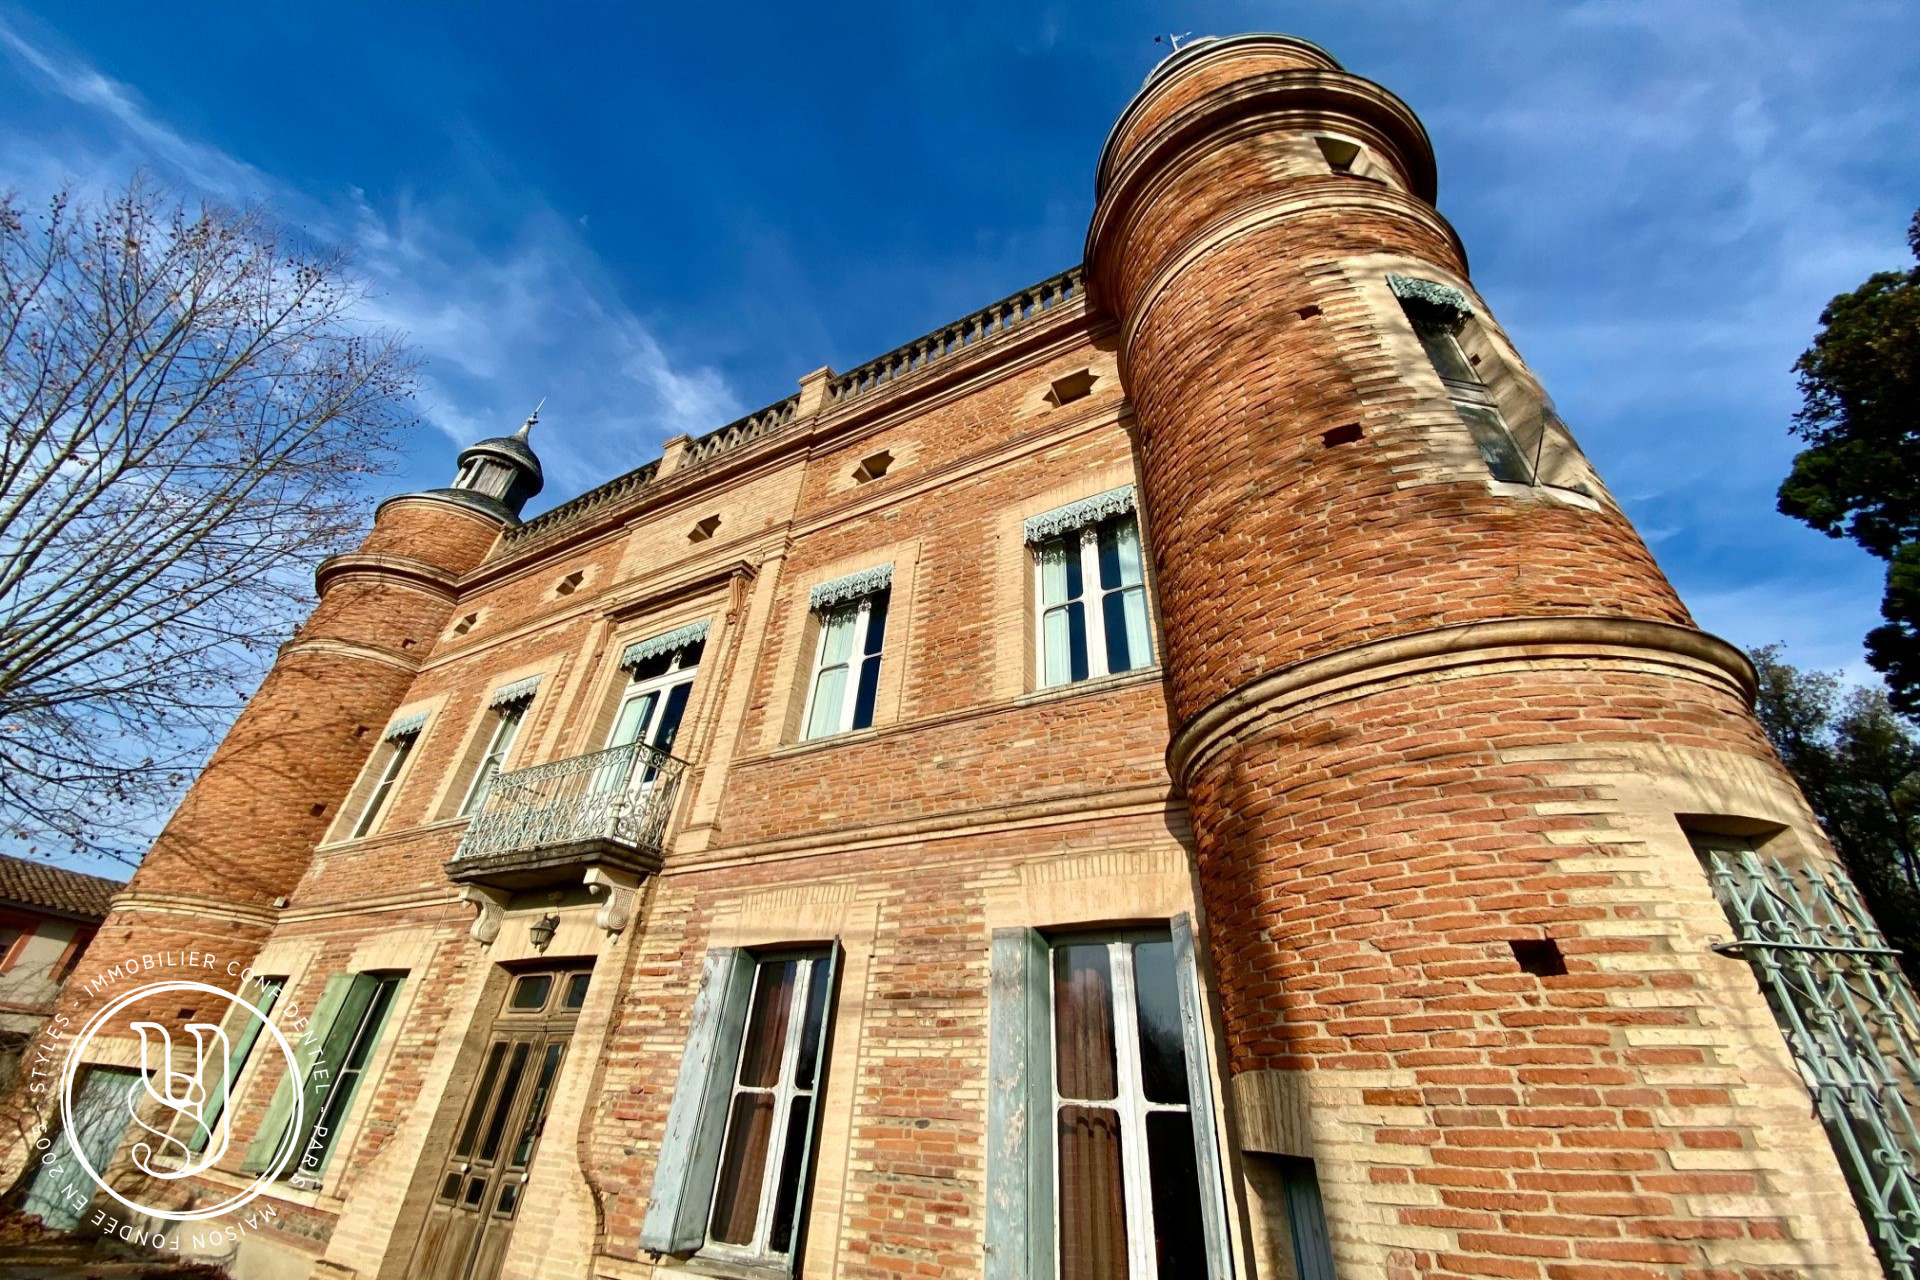 Toulouse - Sold by Styles - Like a little castle - image 8